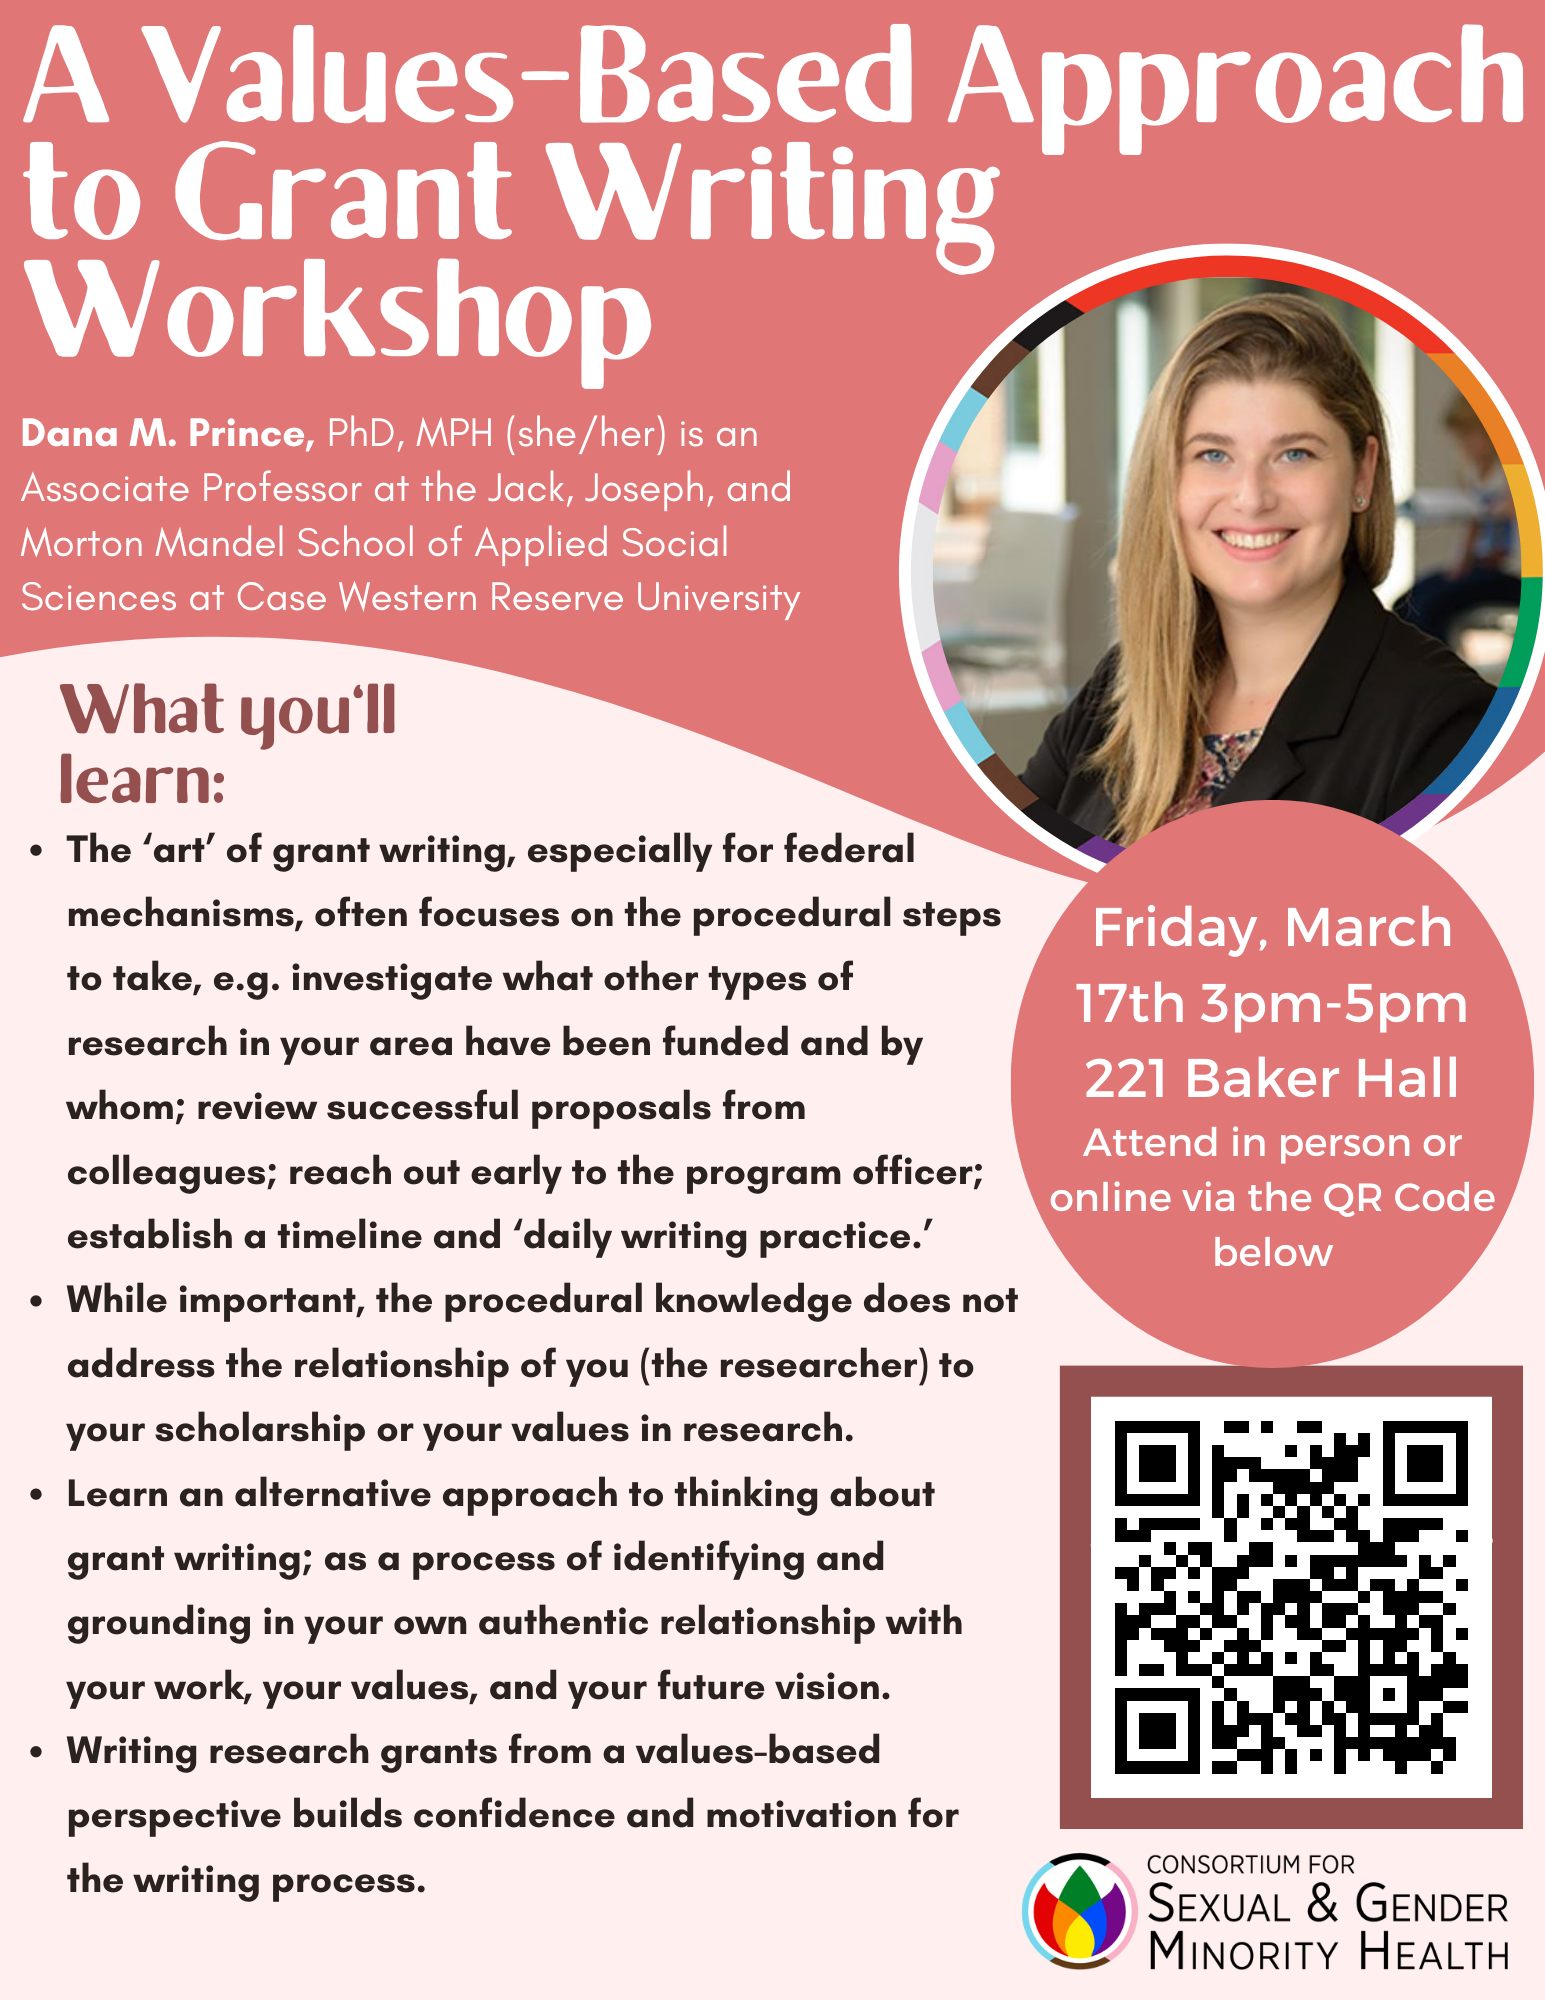 A Values-Based Approach to Grant Writing Workshop flyer